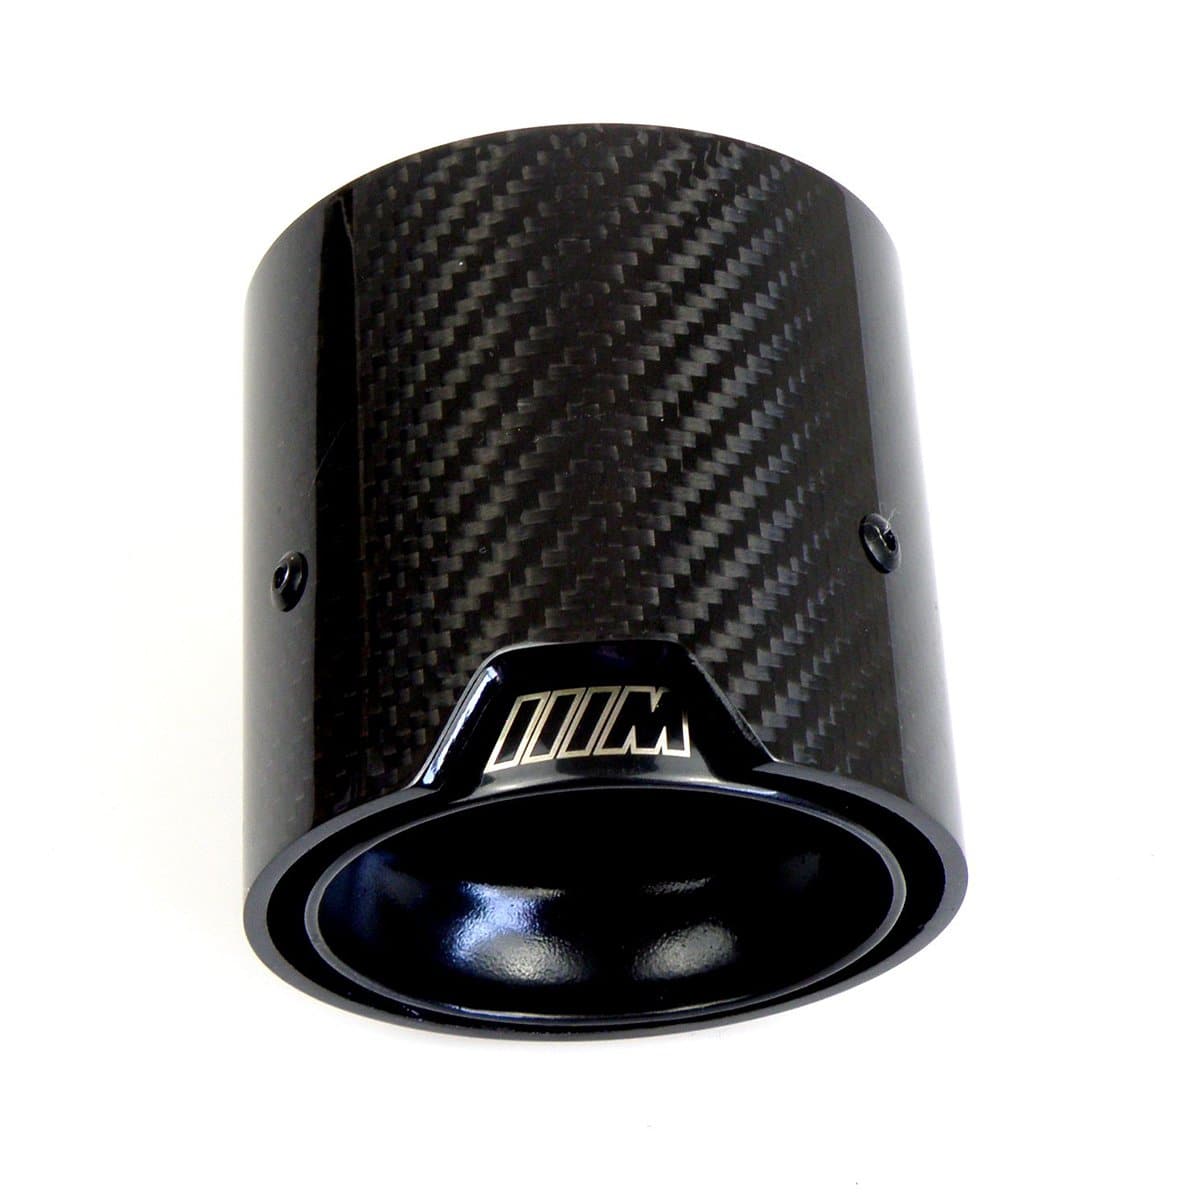 BMW M2/M3/M4/M5/M6 (F87/F80/F82/F83/F10/F06/F12/F13) Black M Performance Carbon Fibre Exhaust Tips - Designed in the M Performance Styling for the M Series BMW Models These exhaust tips are a combination of either a Matt Carbon, or Gloss Carbon Shell finished with High-Temperature Gloss Black Paint Finish with a laser-etched M Logo creating a stunning finish to all M Series BMW Models. 